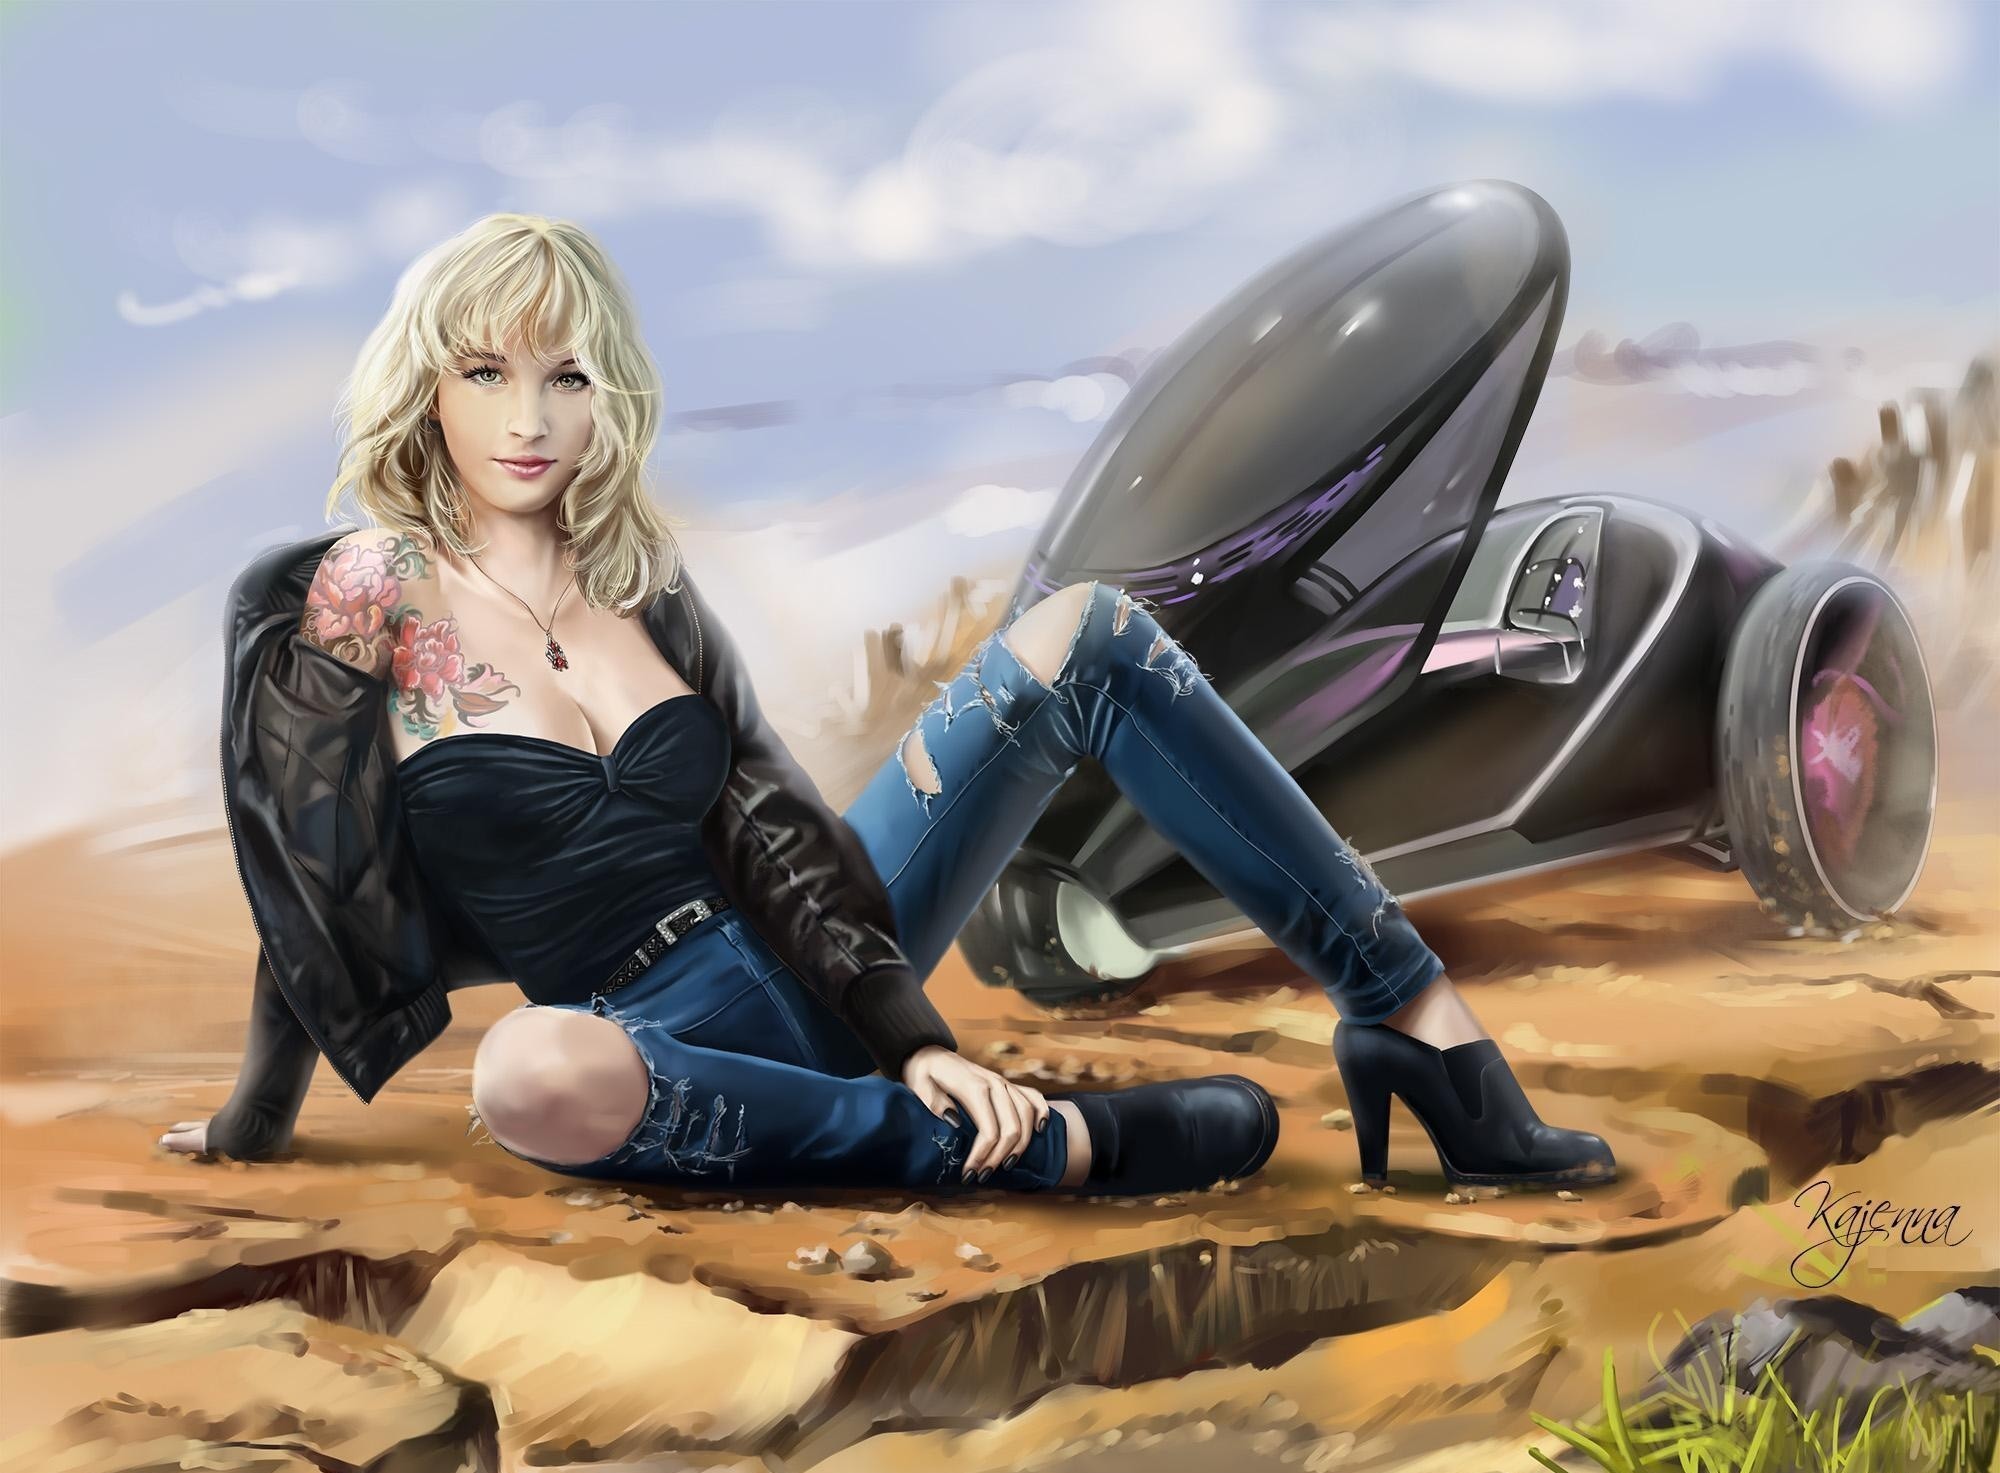 General 2000x1473 painting women with cars science fiction futuristic science fiction women vehicle inked girls blonde necklace torn jeans torn clothes heels sitting sky torn pants